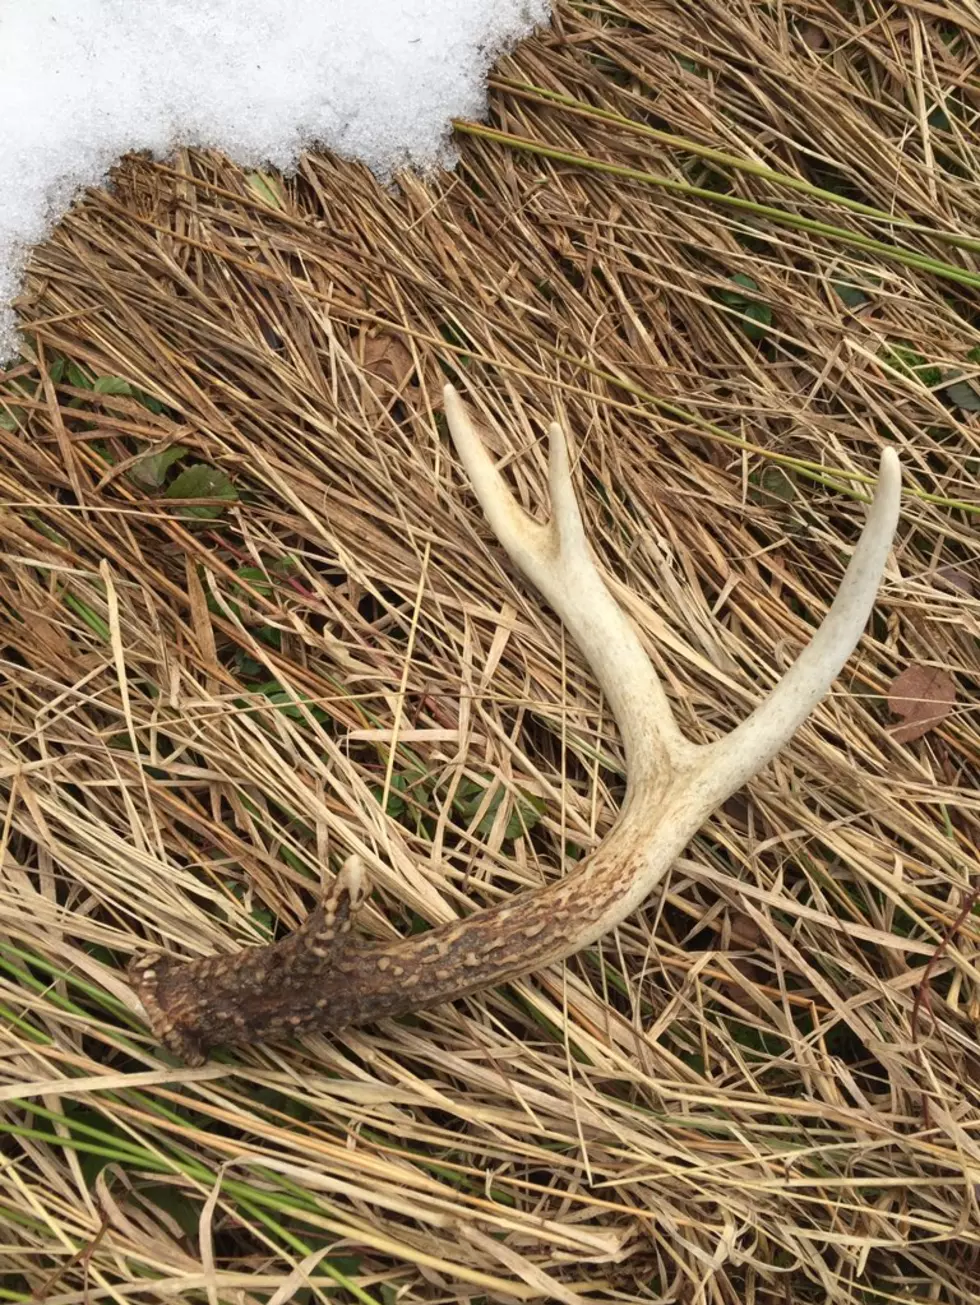 Impressive Whitetail Deer Sheds Found in Chautauqua County